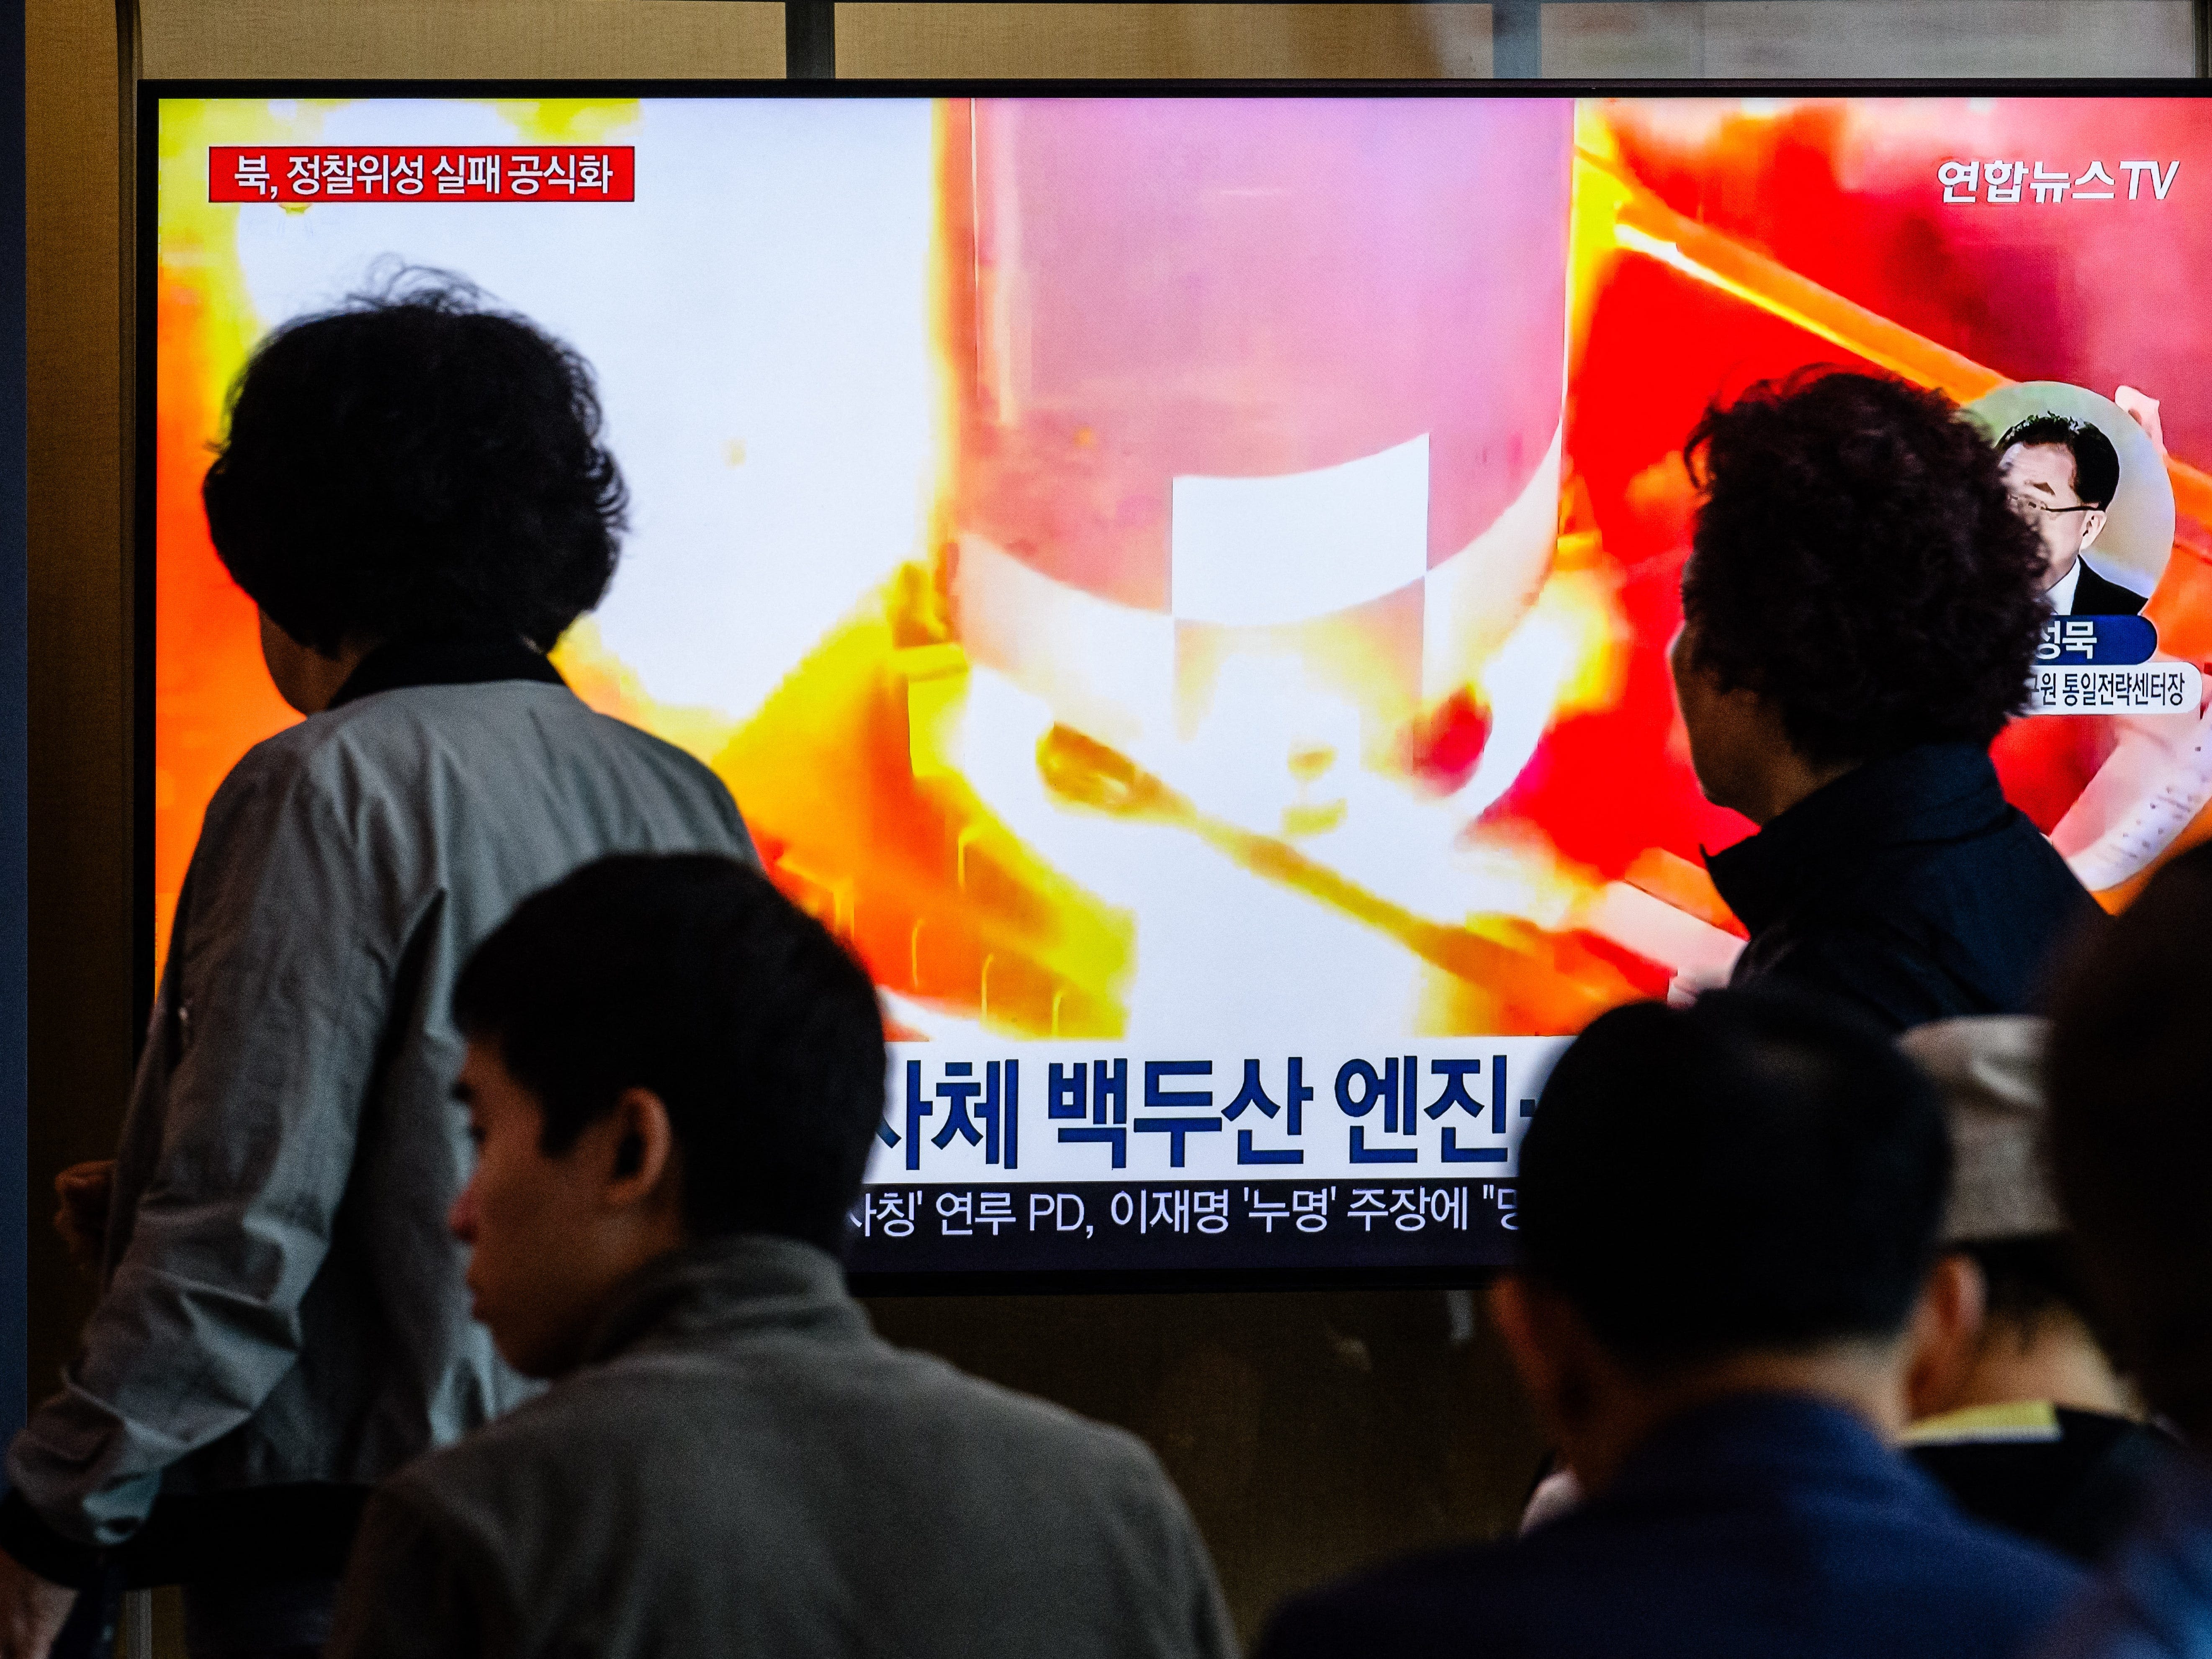 Russian experts were guiding North Korea's space program ahead of Pyongyang blowing up its latest satellite: South Korean report